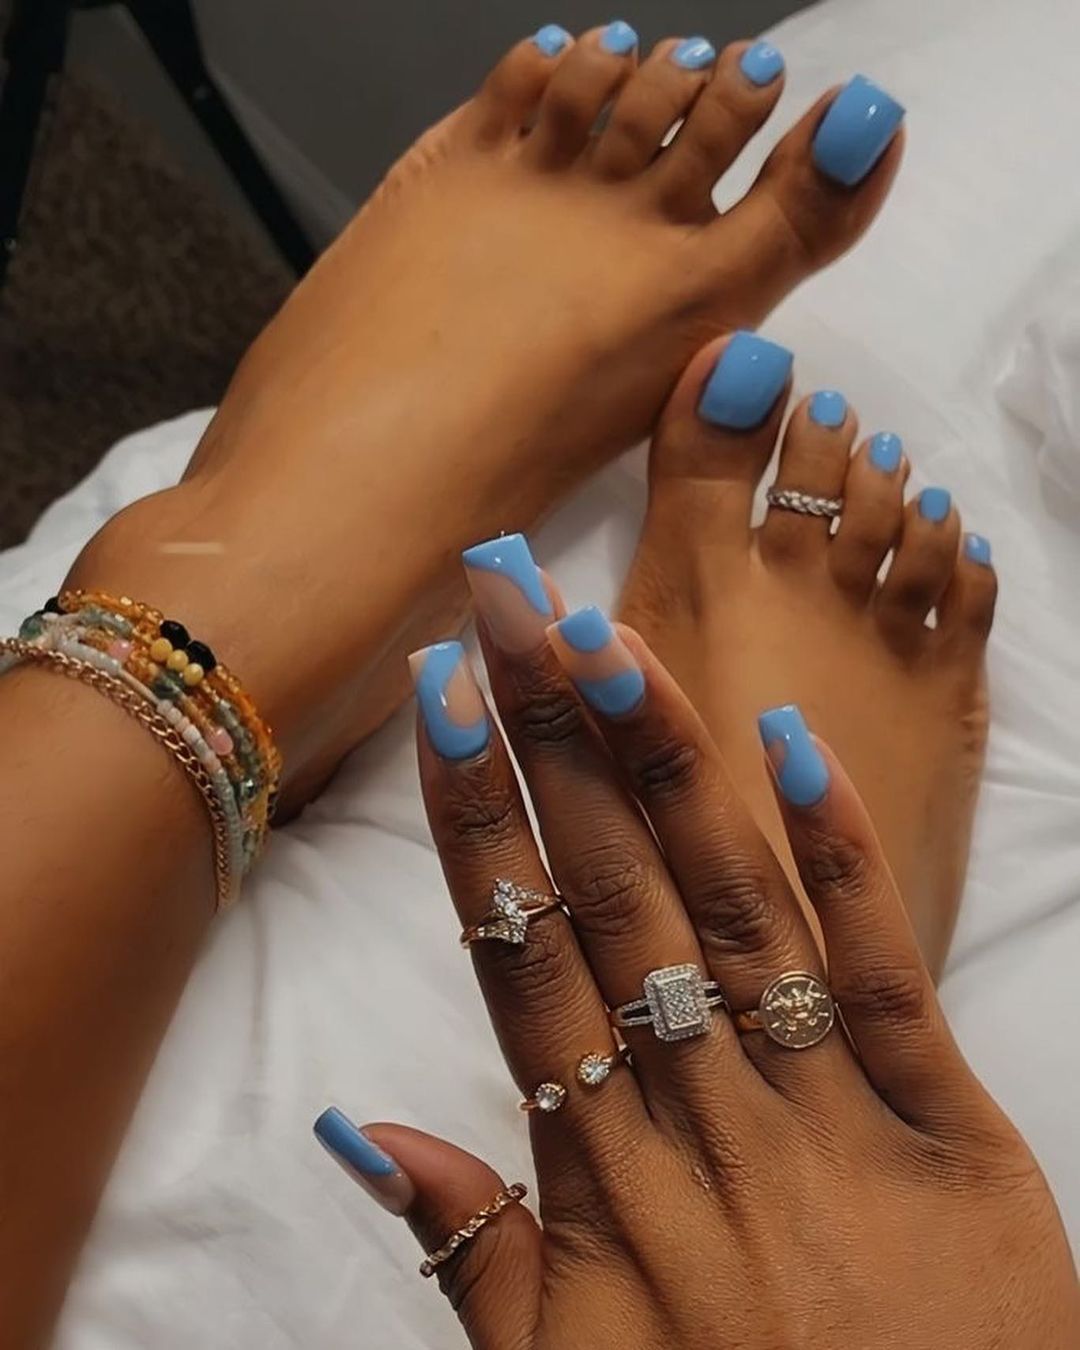 andrew tomac recommends cute matching nails and toes pic